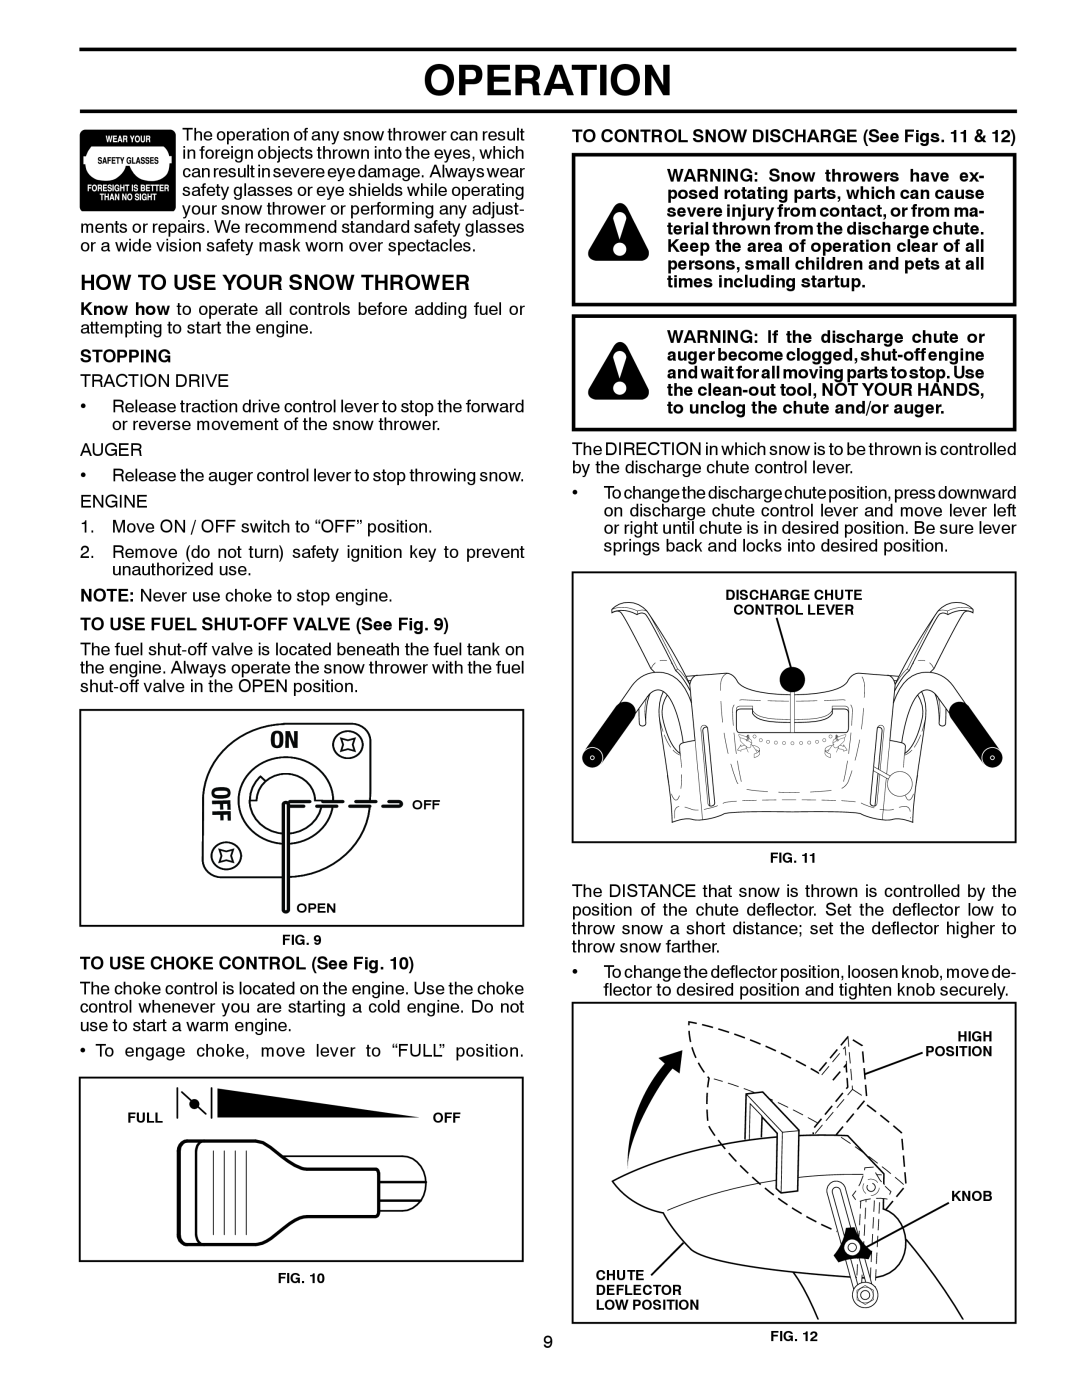 McCulloch MC627ES, 96192004100 How To Use Your Snow Thrower, Operation, Stopping, TO USE FUEL SHUT-OFF VALVE See Fig 